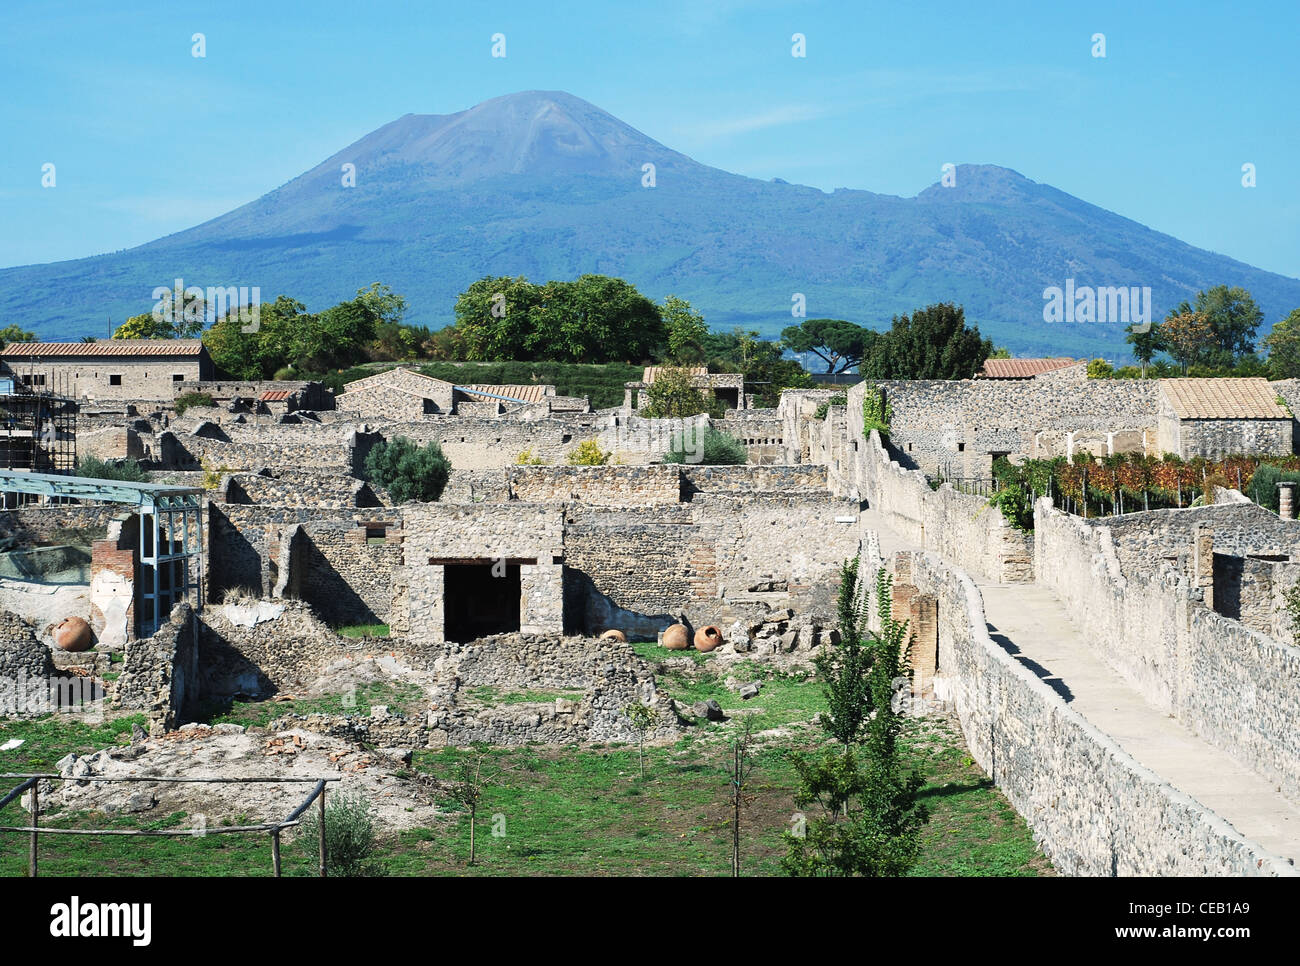 View of the Pompeii ruins in italy with Mount Vesuvius in background Stock Photo